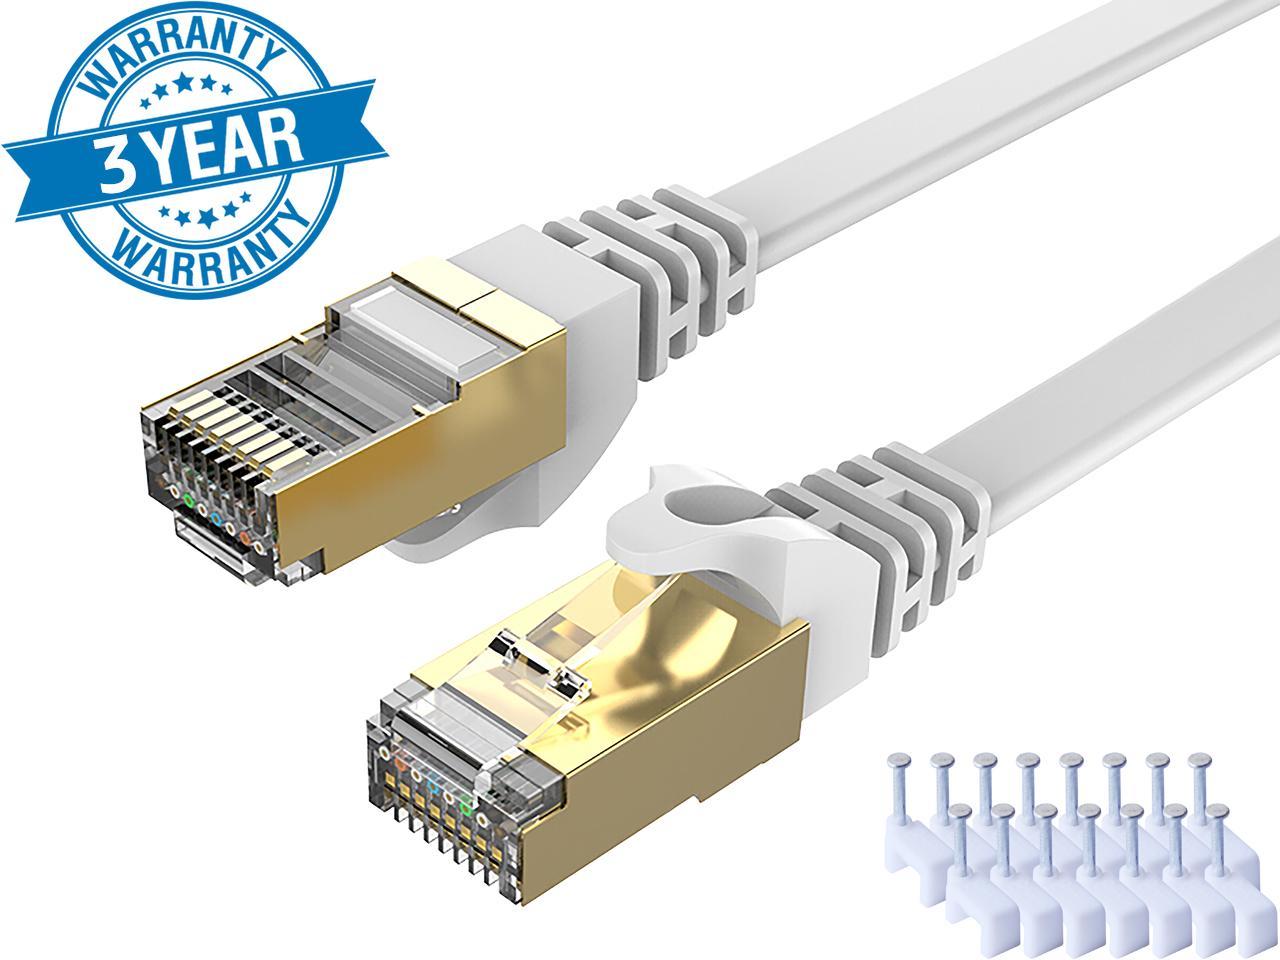 Cat7 Ethernet Cable 100ft White Computer LAN Cable Flat High Speed Internet Patch Cable Ethernet Cord with Cable Clips Faster Than Cat5/Cat6 